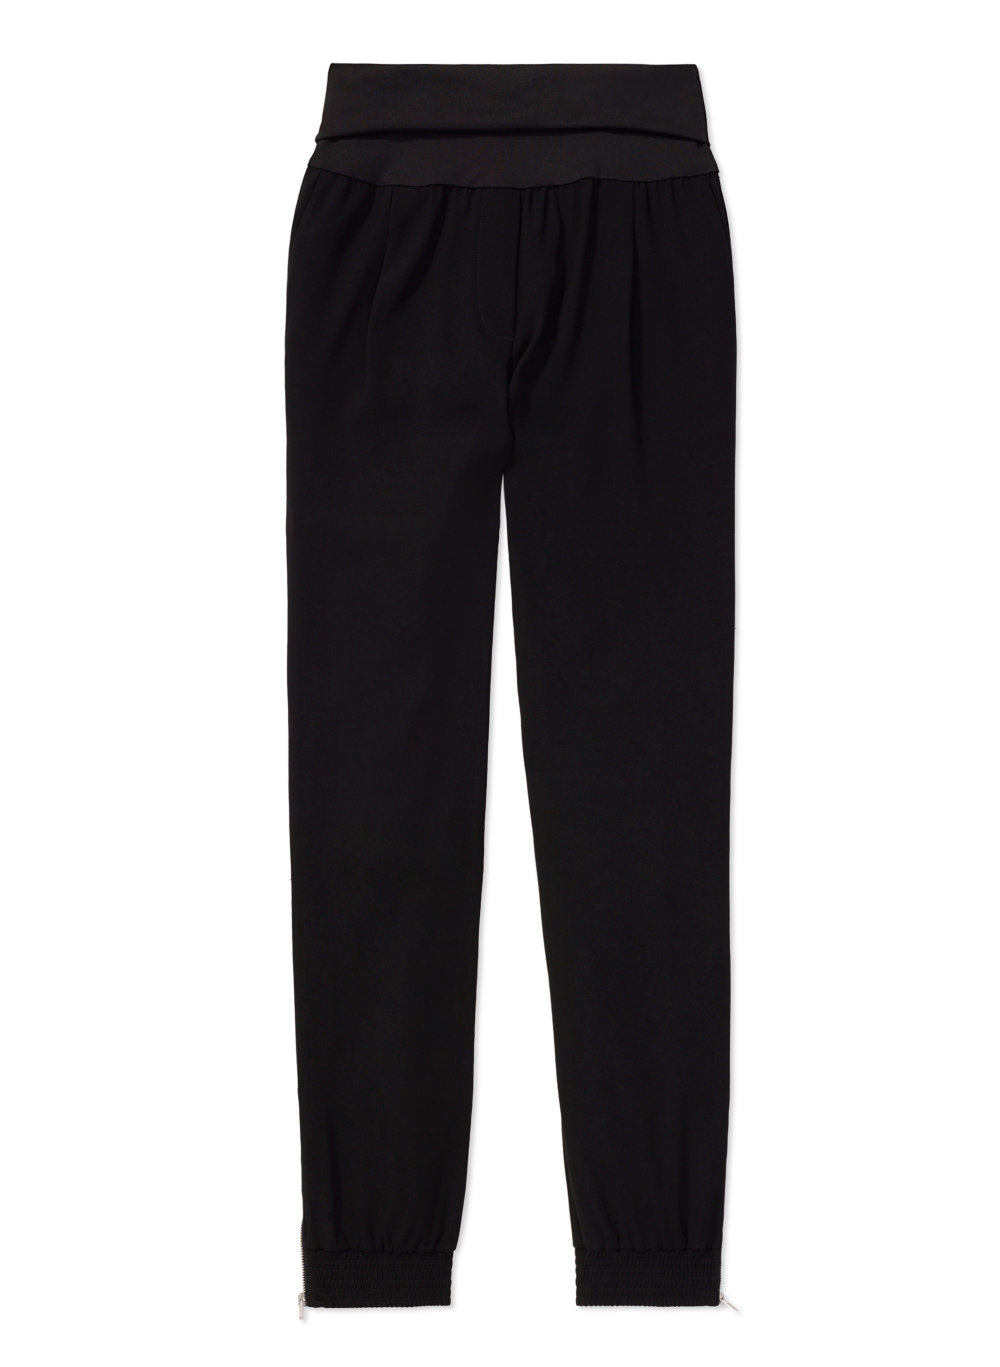 Wilfred ERMONT PANT | Aritzia